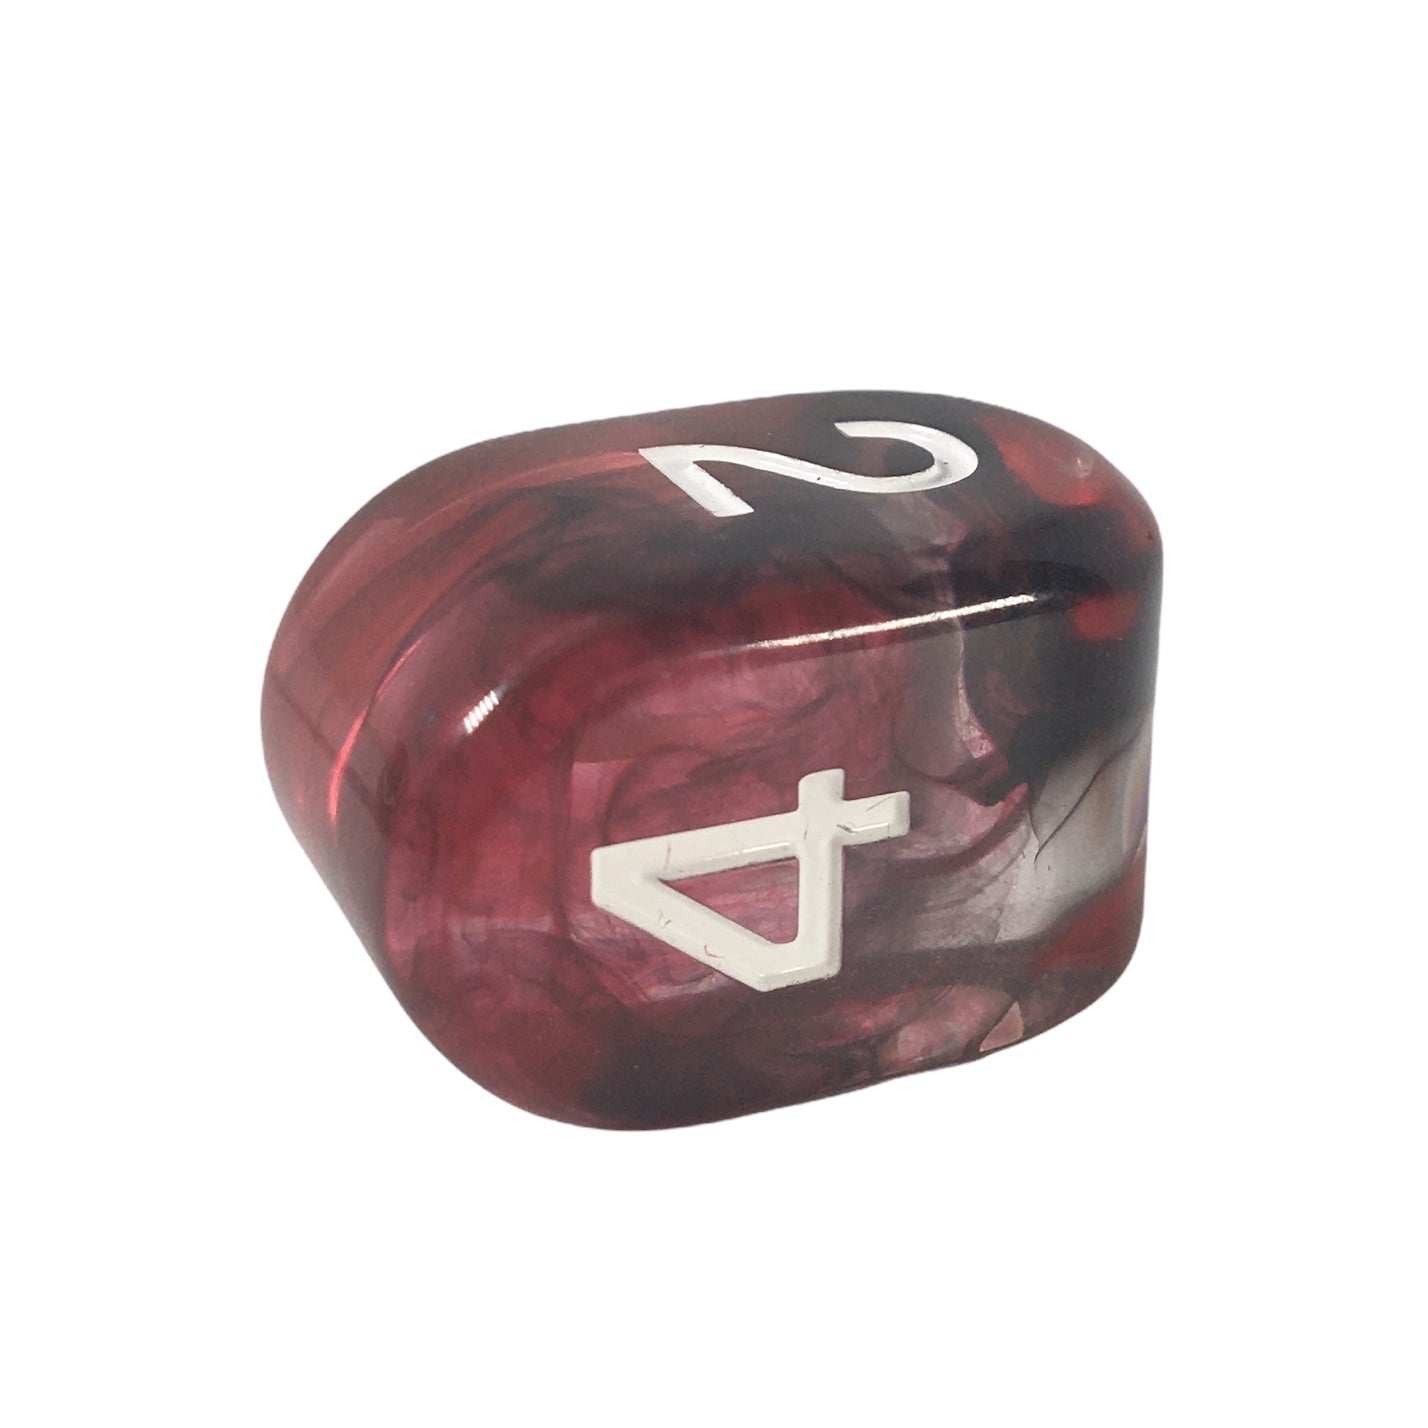 Role 4 Initiative Dungeons Dragons Dice Diffusion Bloodstone